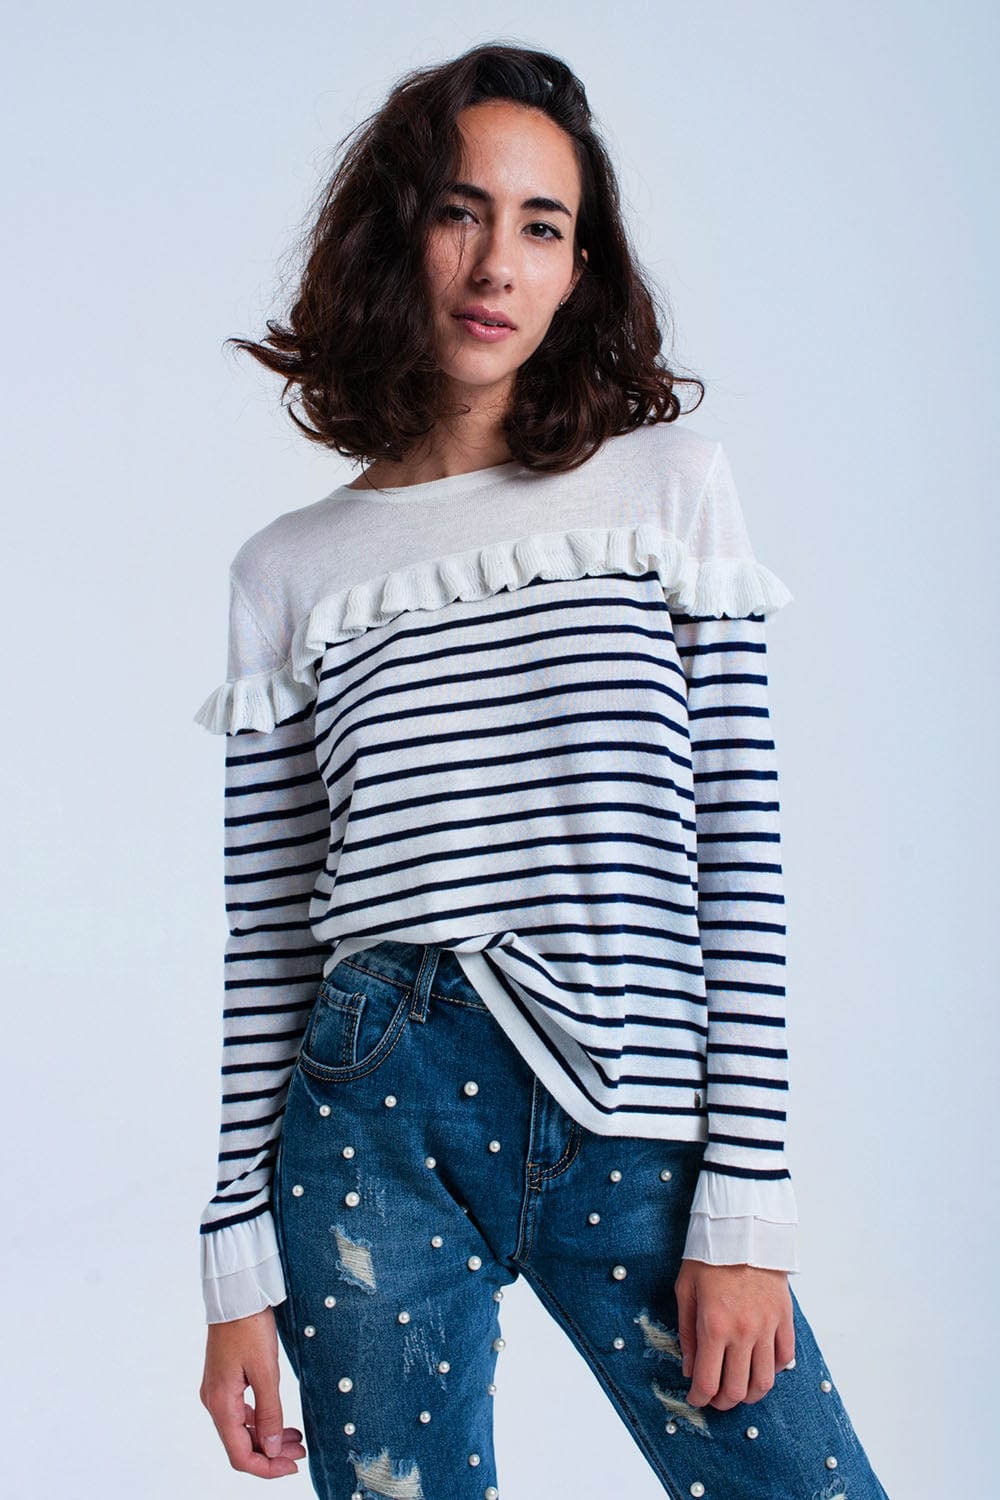 Q2 Sweaters Navy striped sweater with ruffles